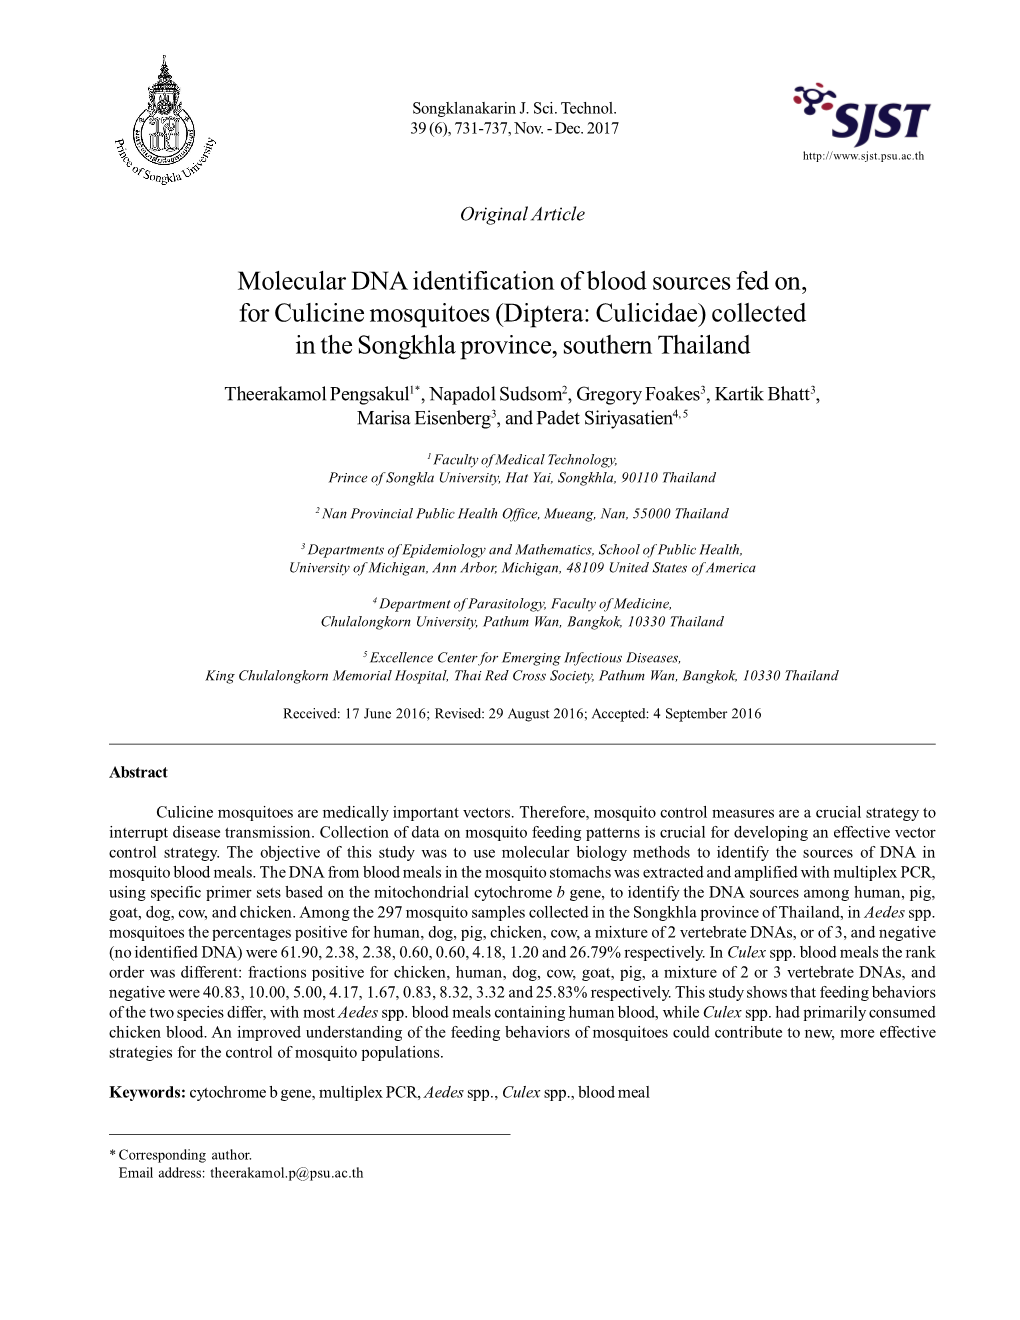 Molecular DNA Identification of Blood Sources Fed On, for Culicine Mosquitoes (Diptera: Culicidae) Collected in the Songkhla Province, Southern Thailand